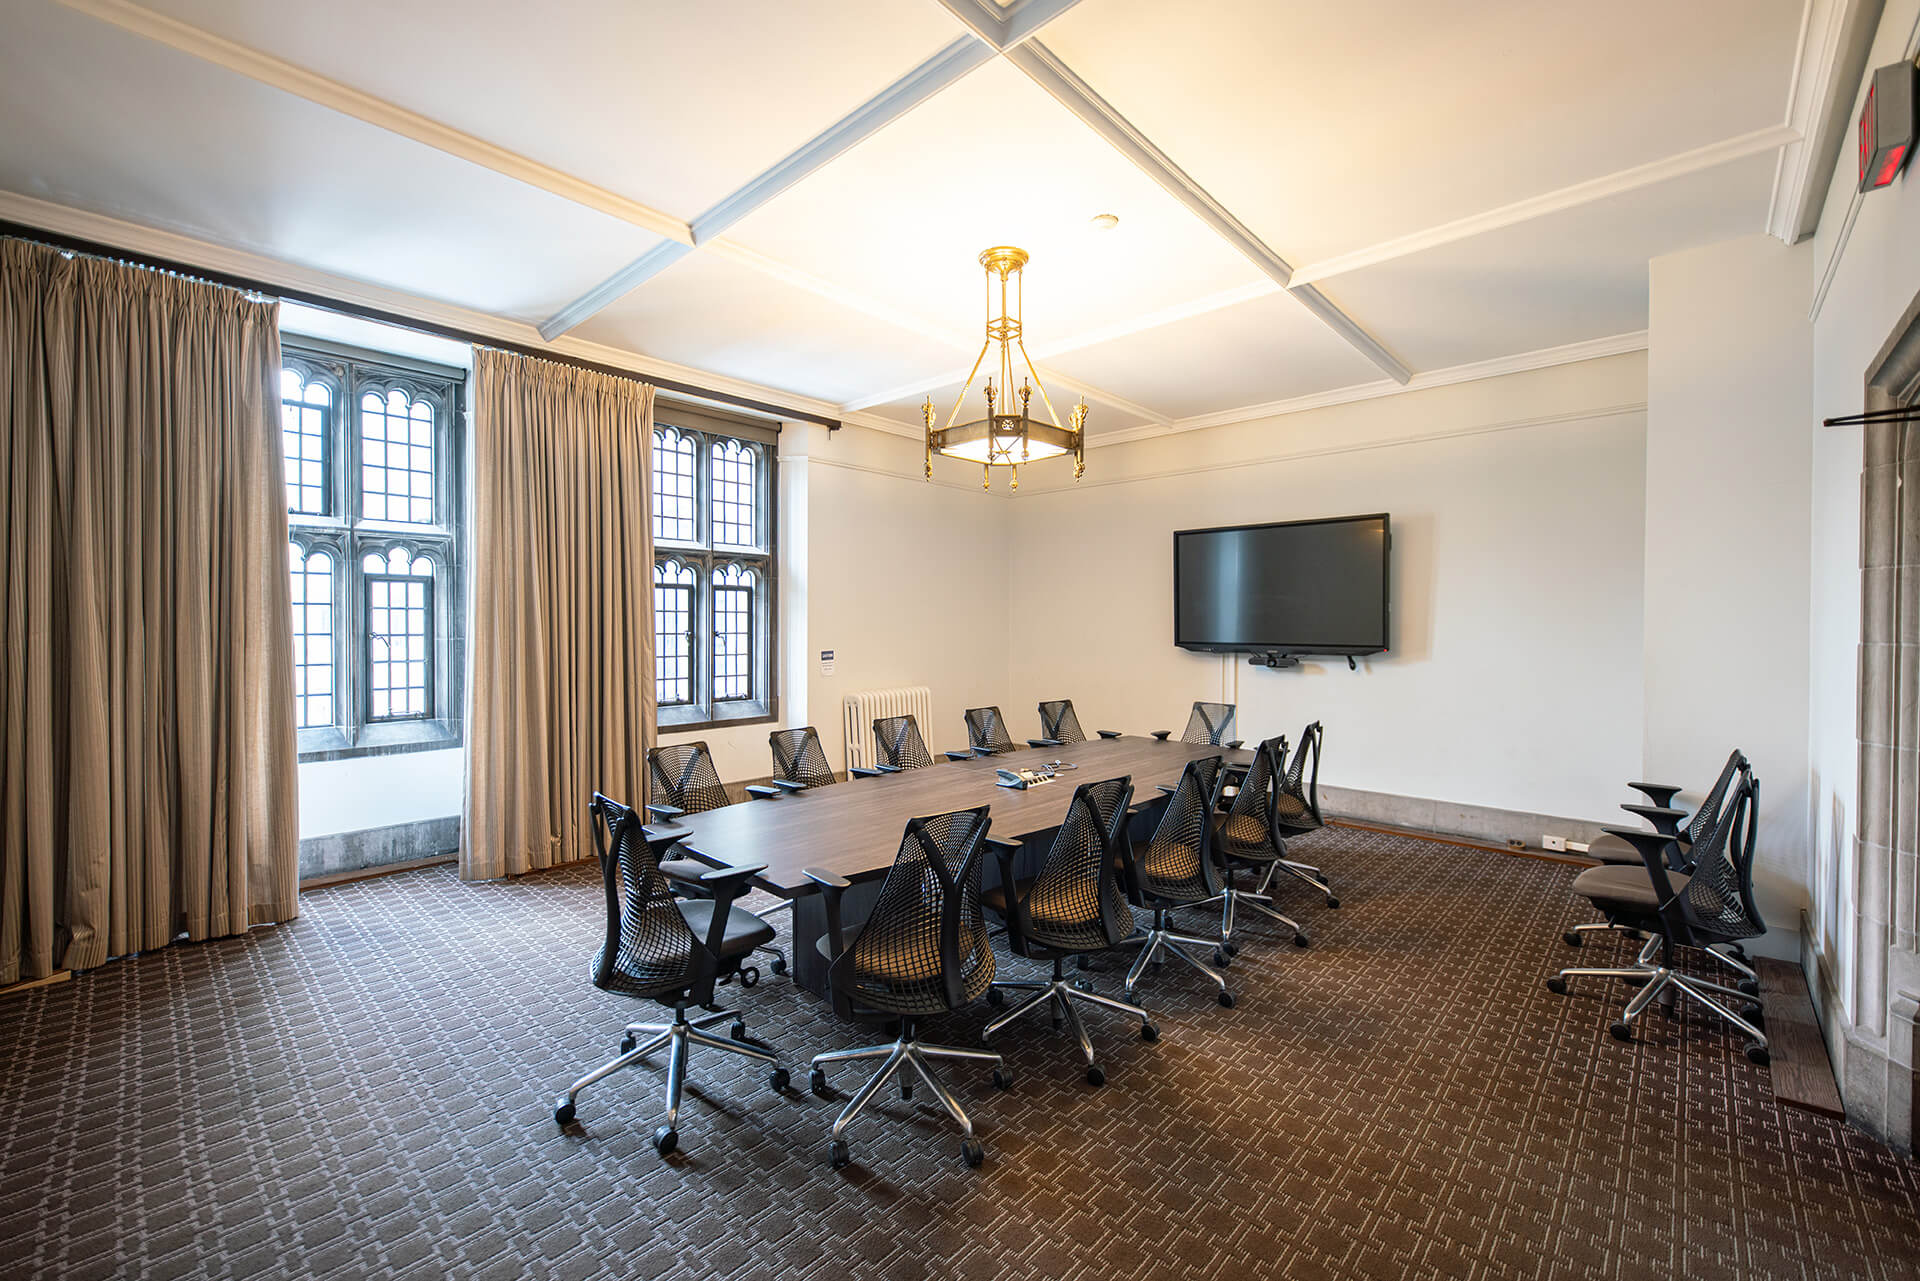 A large board table, comfortable chairs and a flatscreen with video conference capabilities.